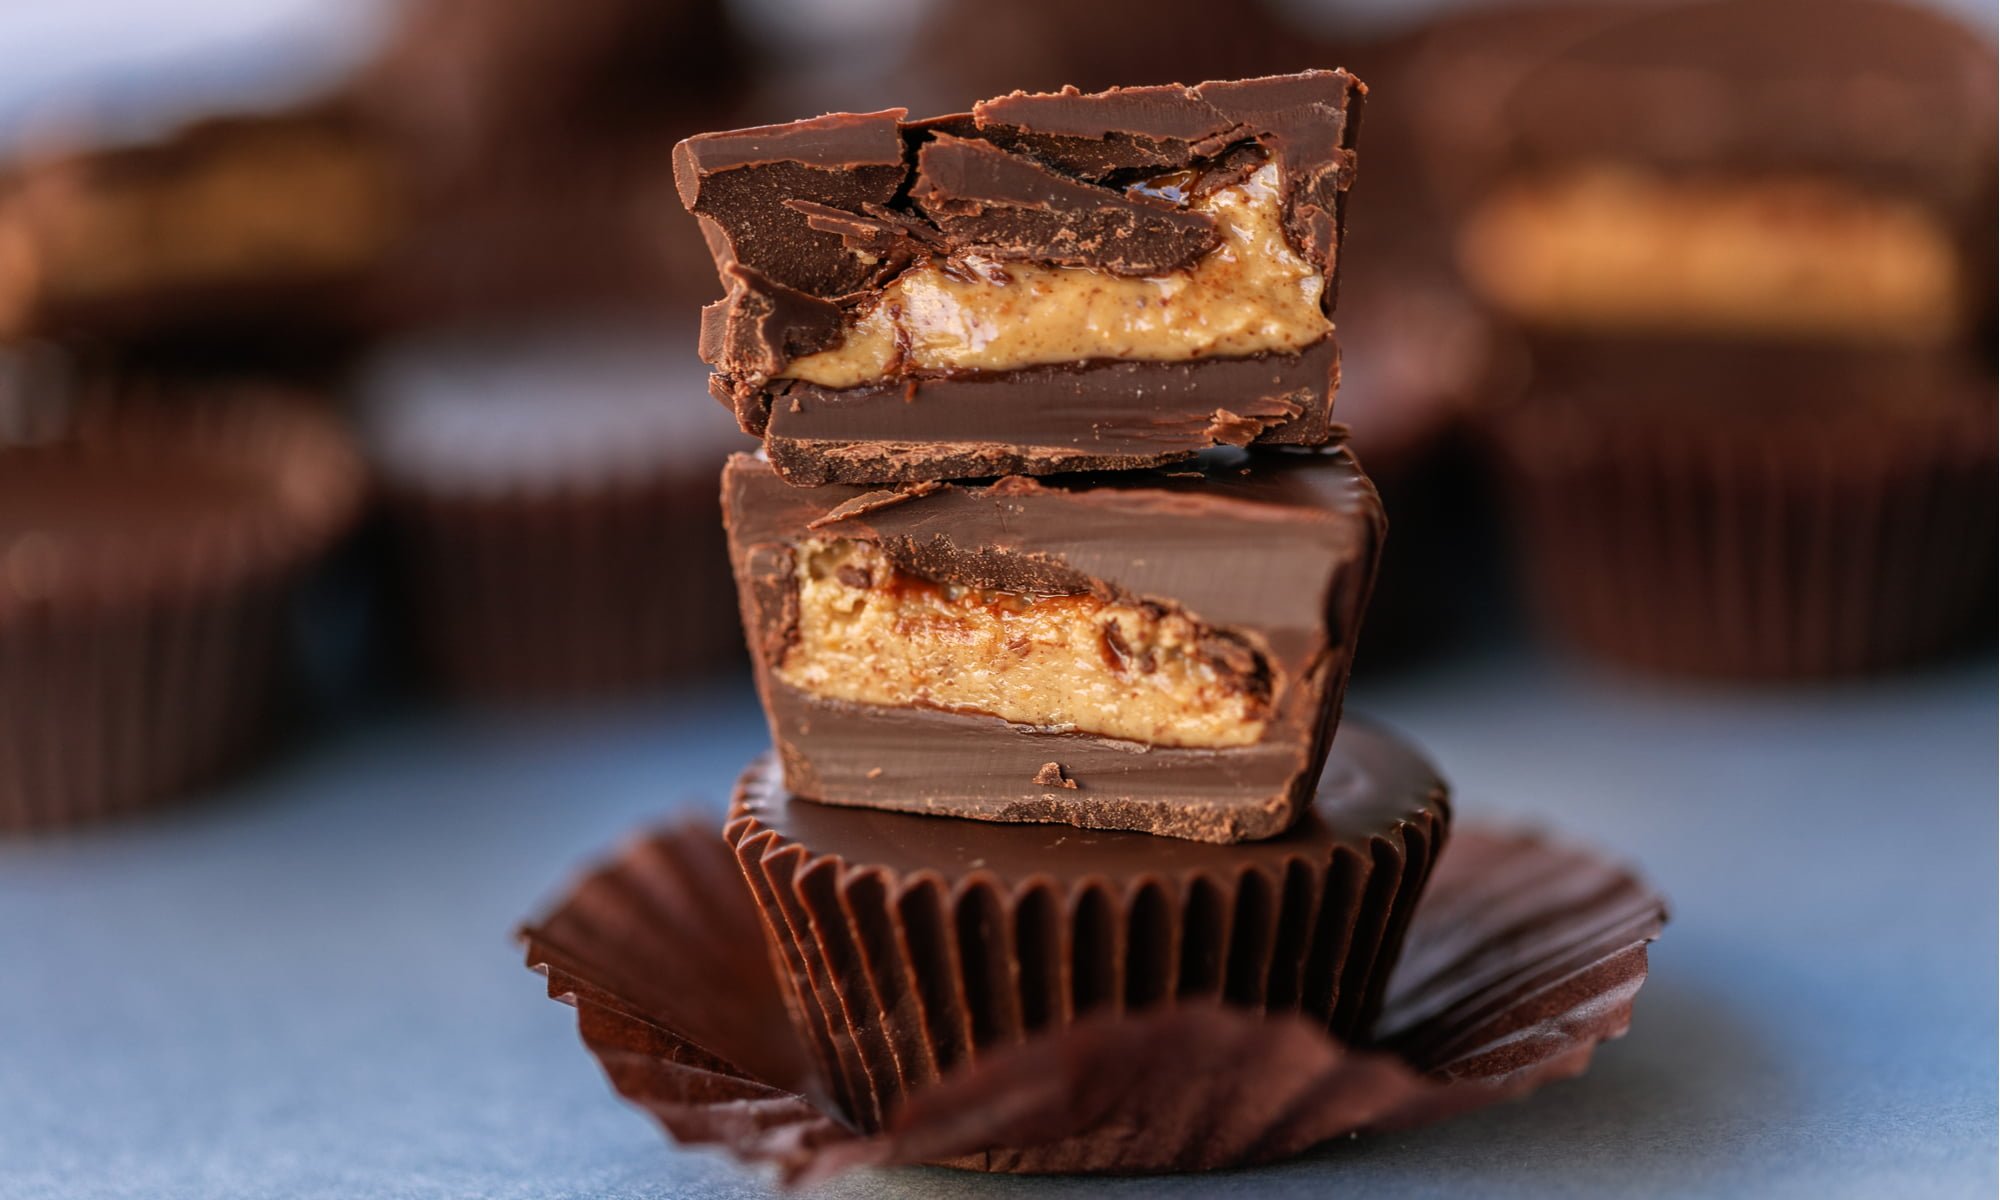 Healthy Chocolate Peanut Butter Cups To Satisfy Your Sweet Tooth